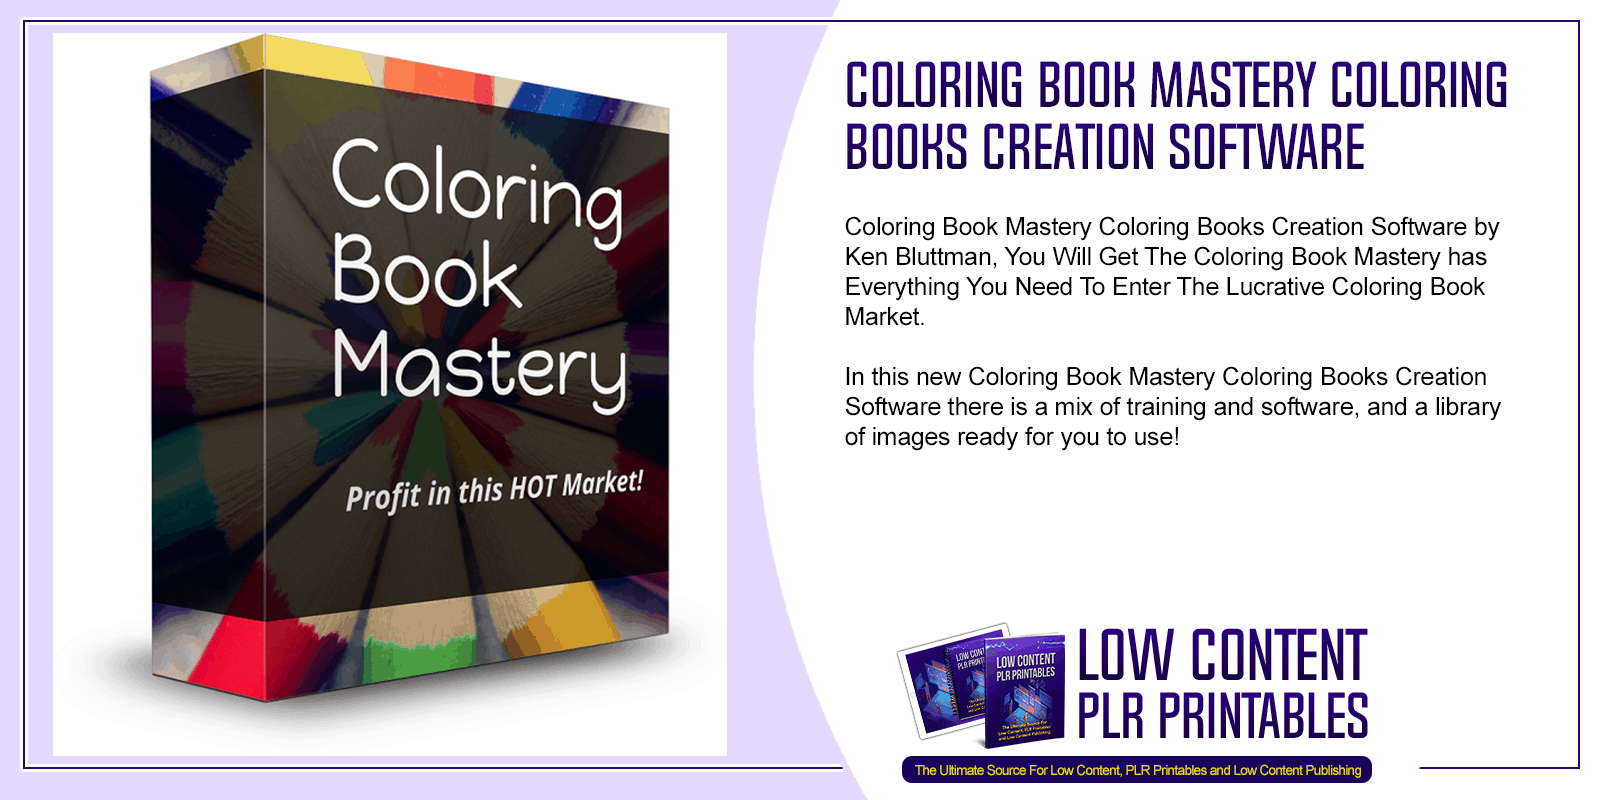 Coloring Book Mastery Coloring Books Creation Software